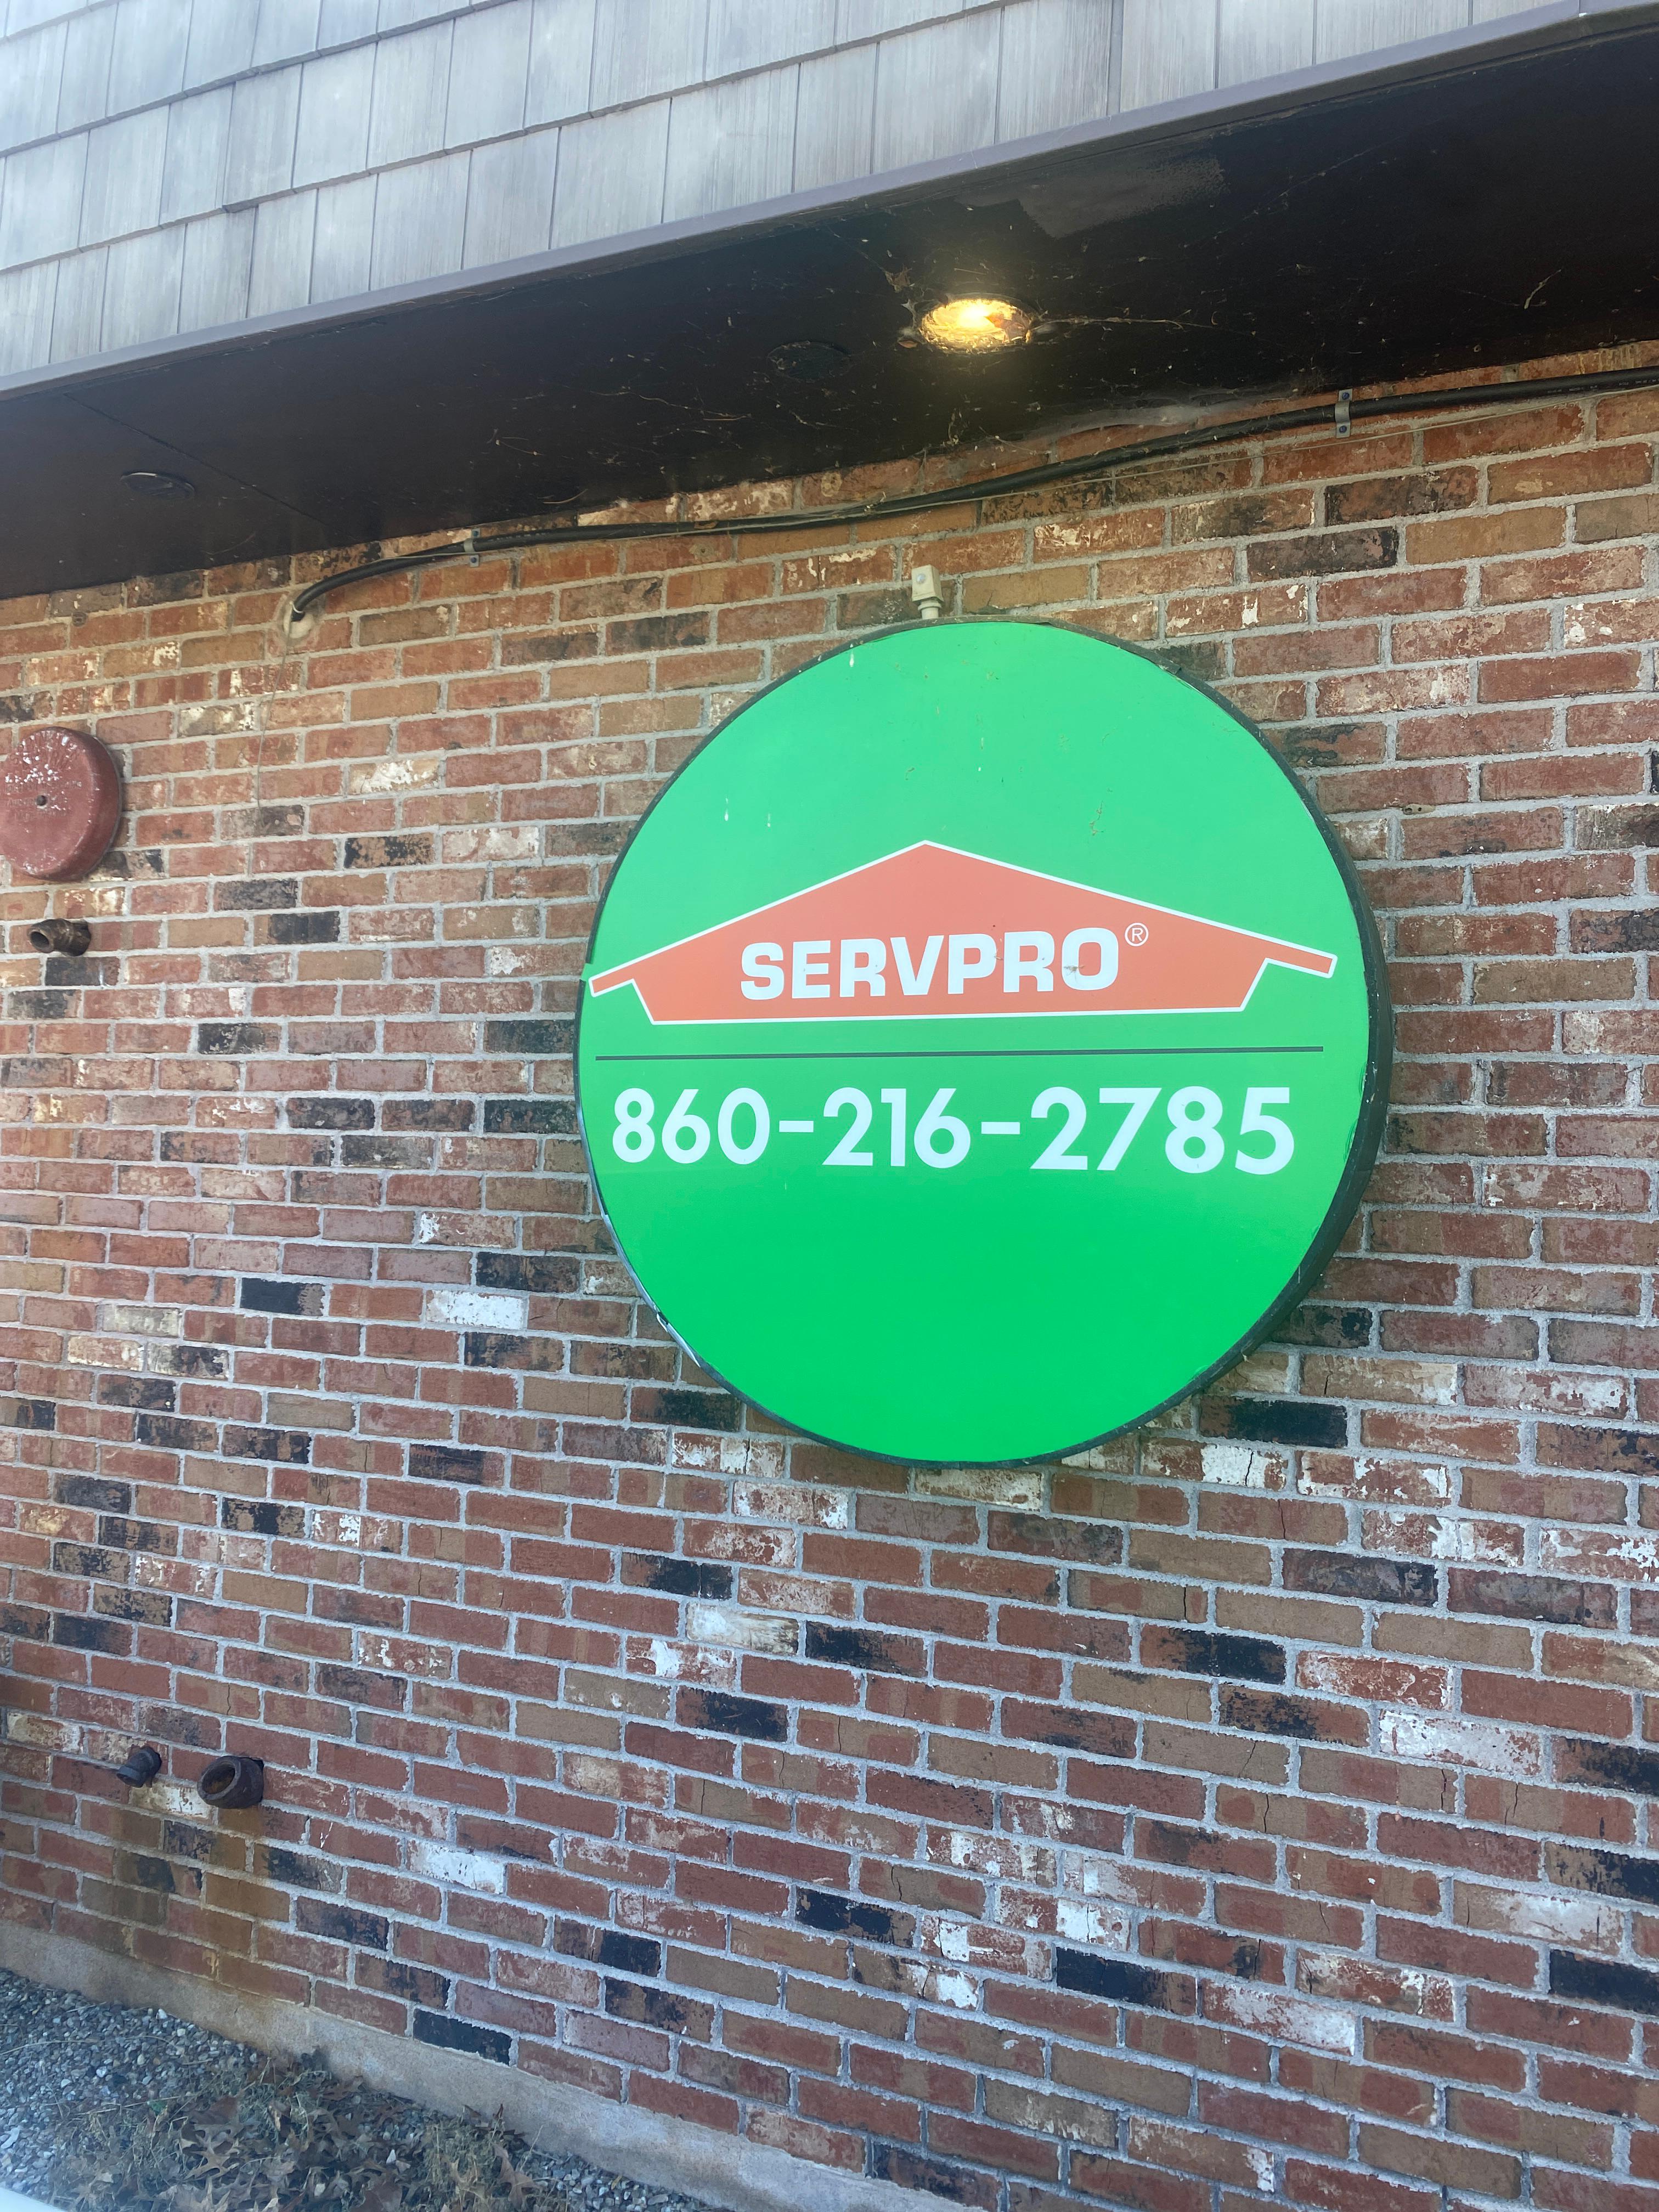 SERVPRO Bloomfield/Enfield sign with phone number